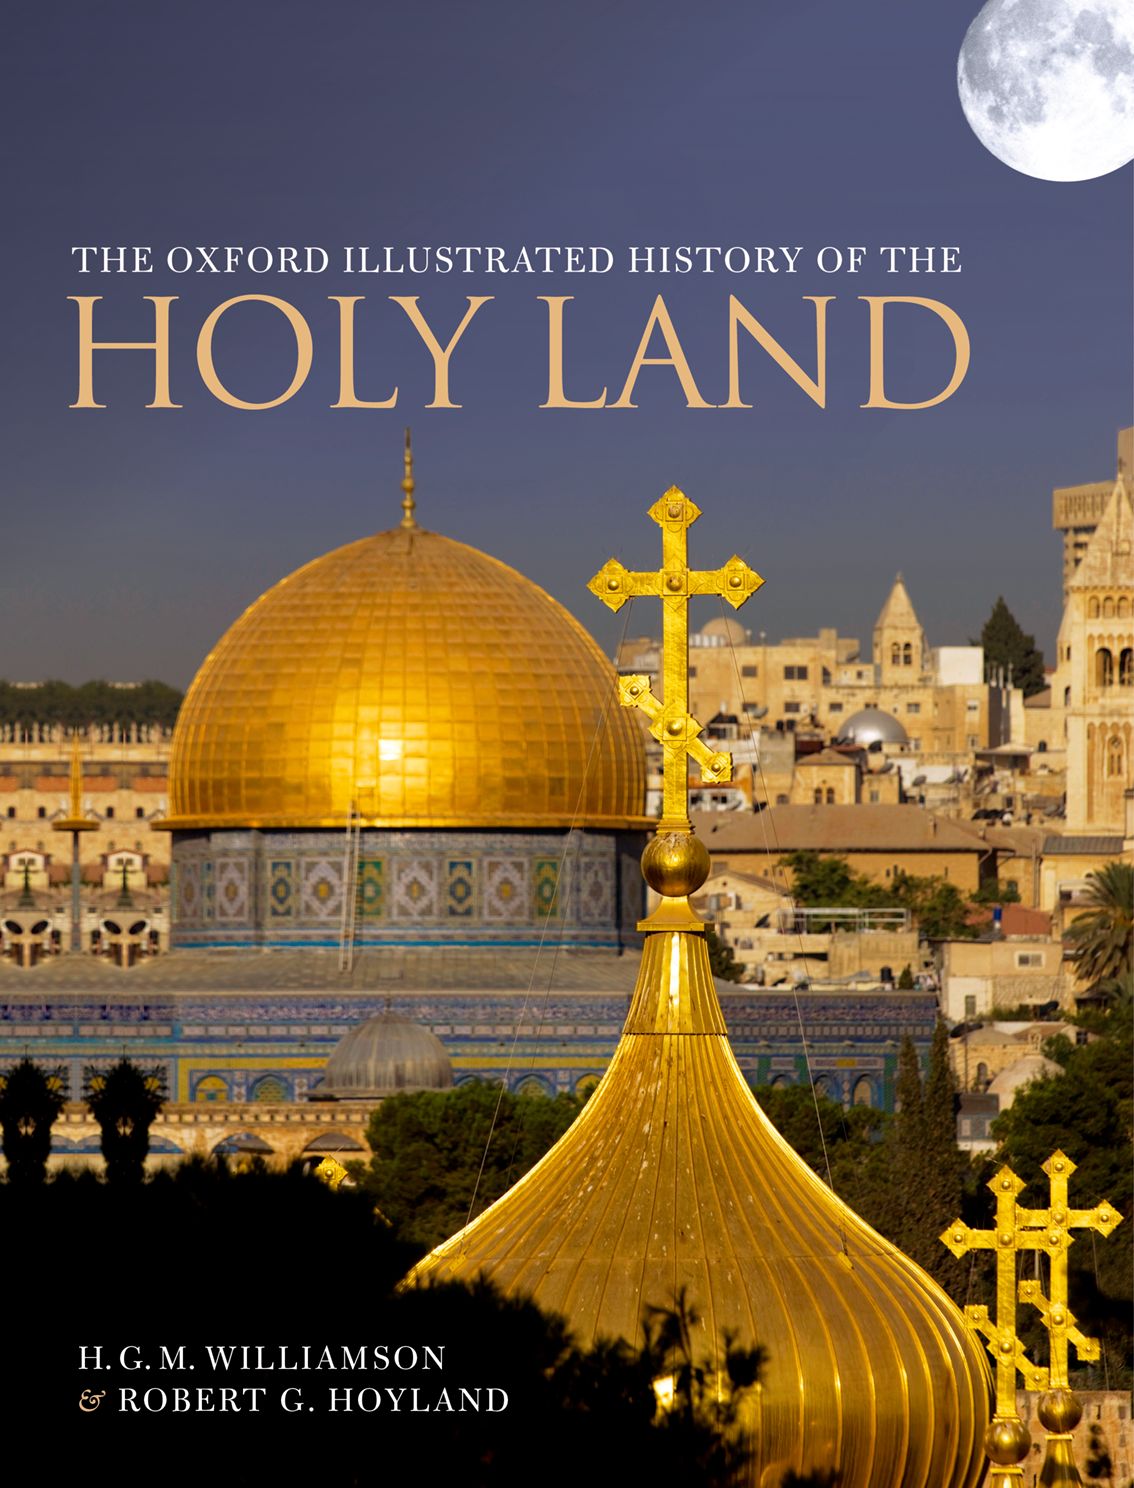 The Oxford Illustrated History of the Holyland